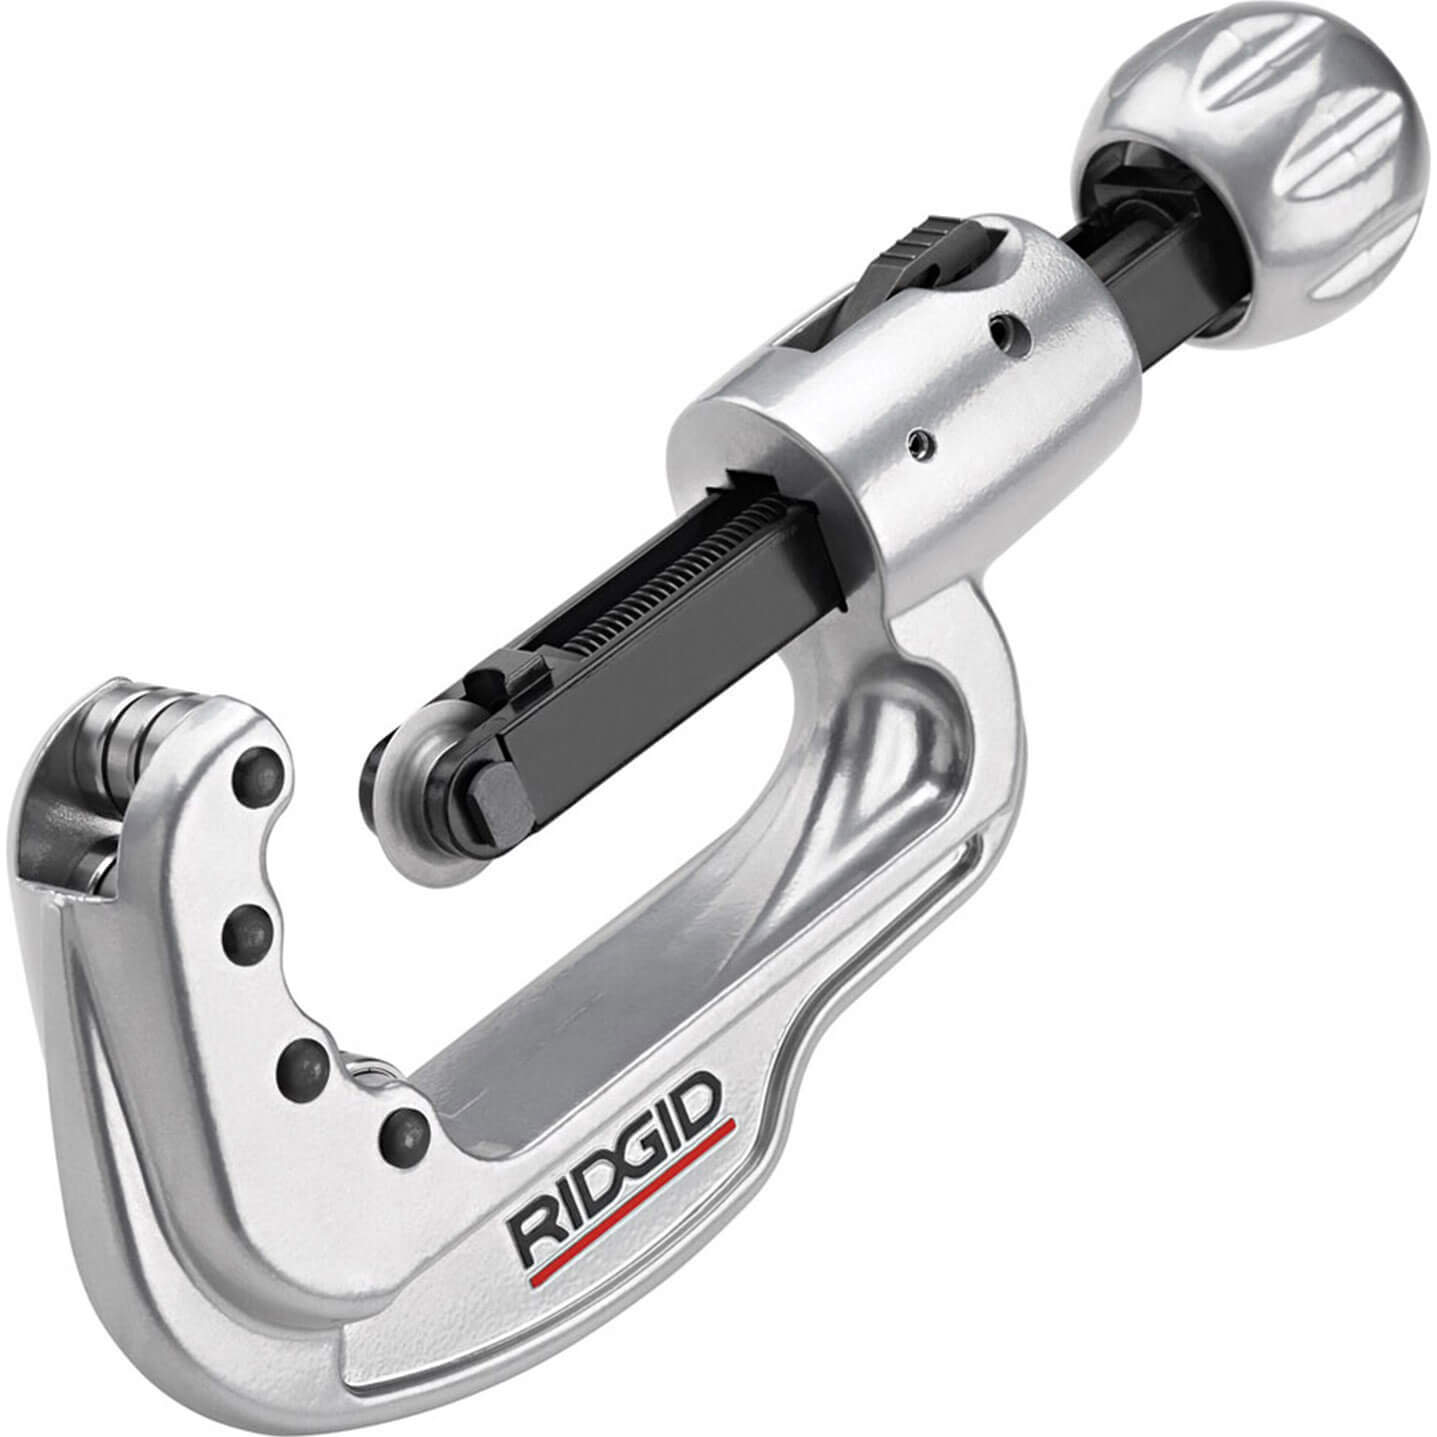 Image of Ridgid Adjustable Pipe Cutter for Stainless Steel 6mm - 65mm